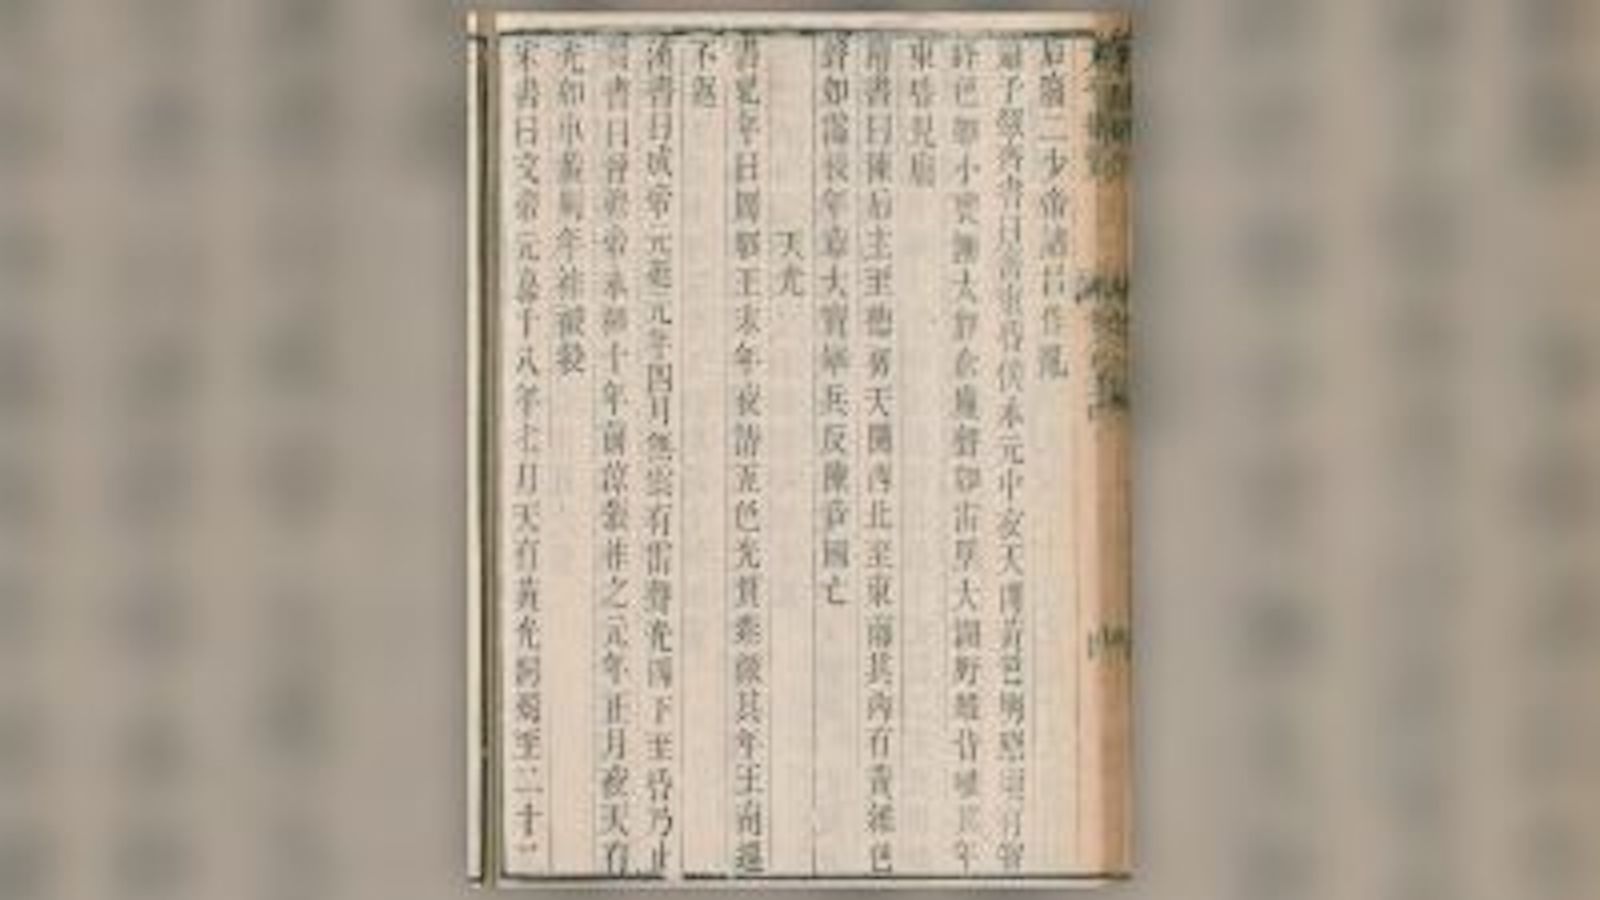 One of the Bamboo Annals' translated fragments.